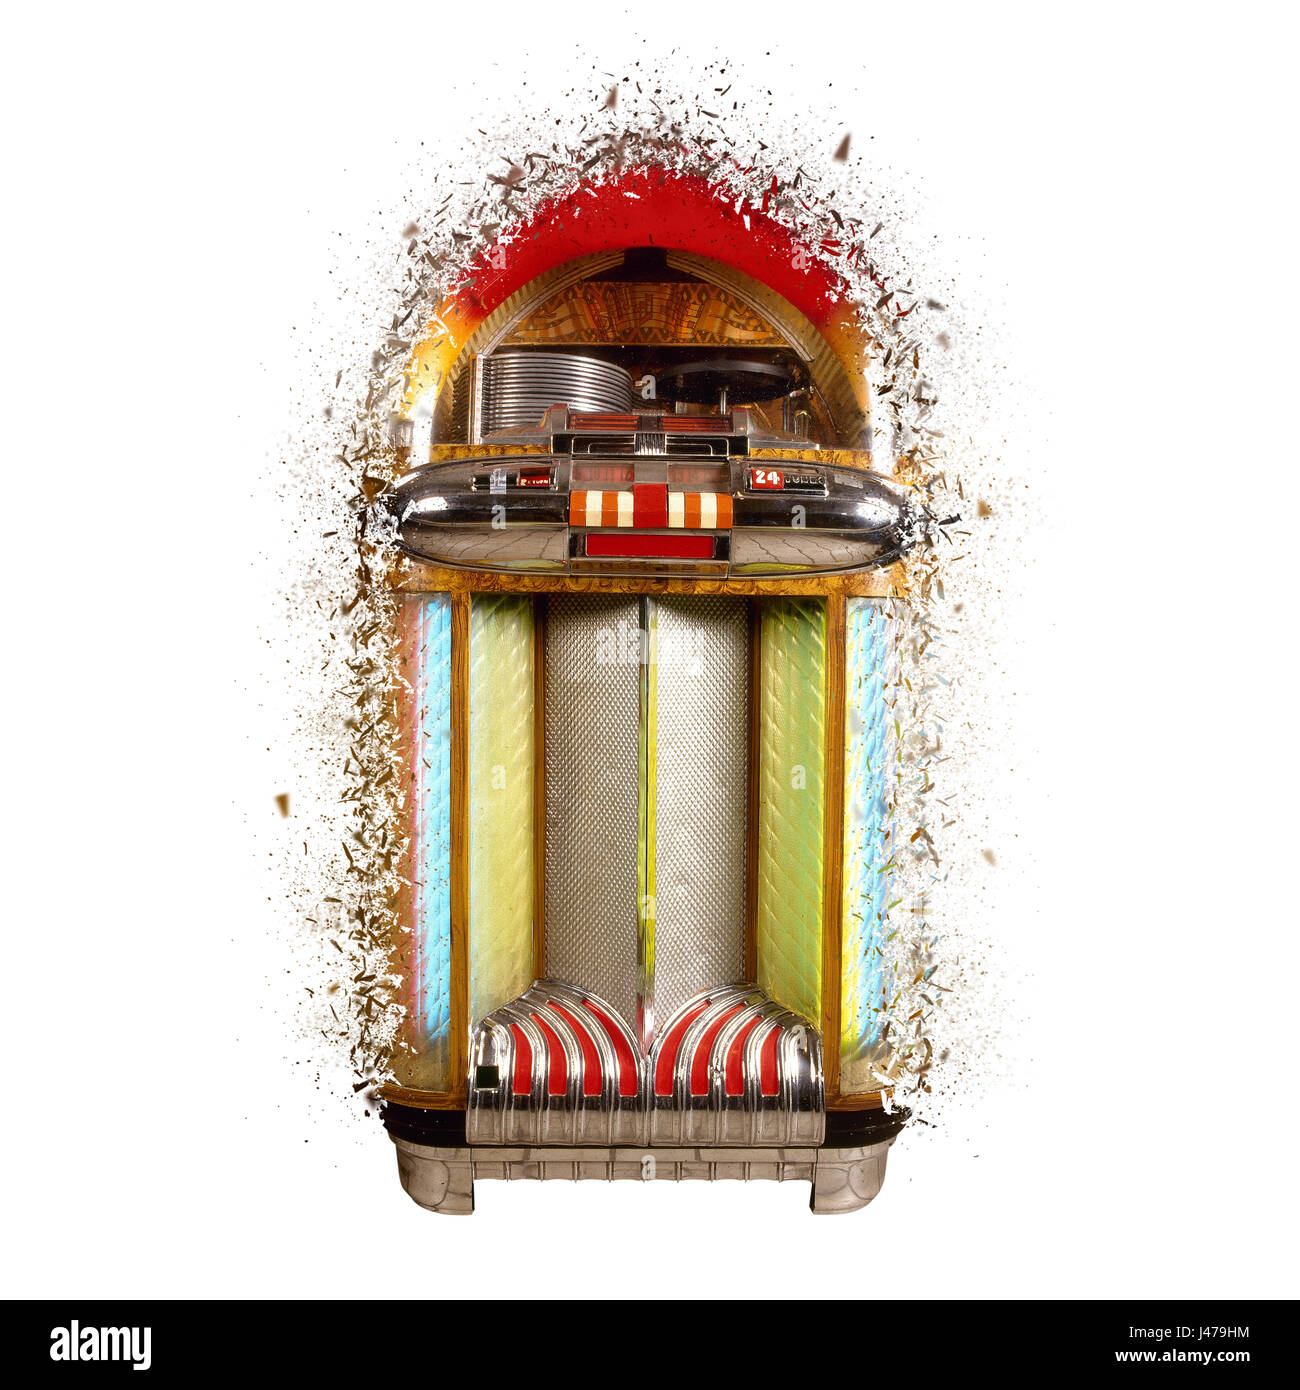 Old jukebox music player exploded on white background Stock Photo